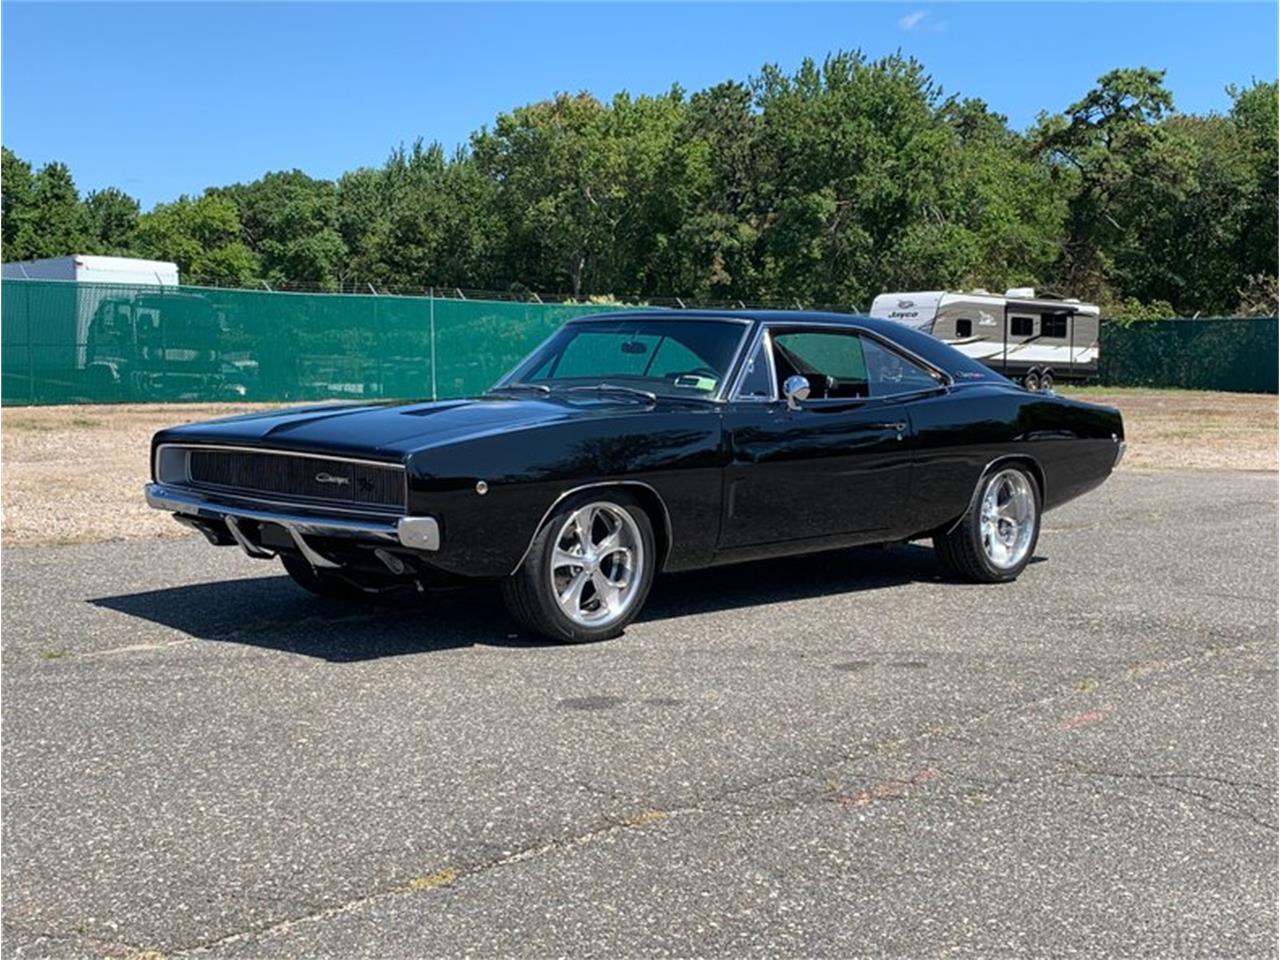 1968 Dodge Charger for Sale | ClassicCars.com | CC-1257308